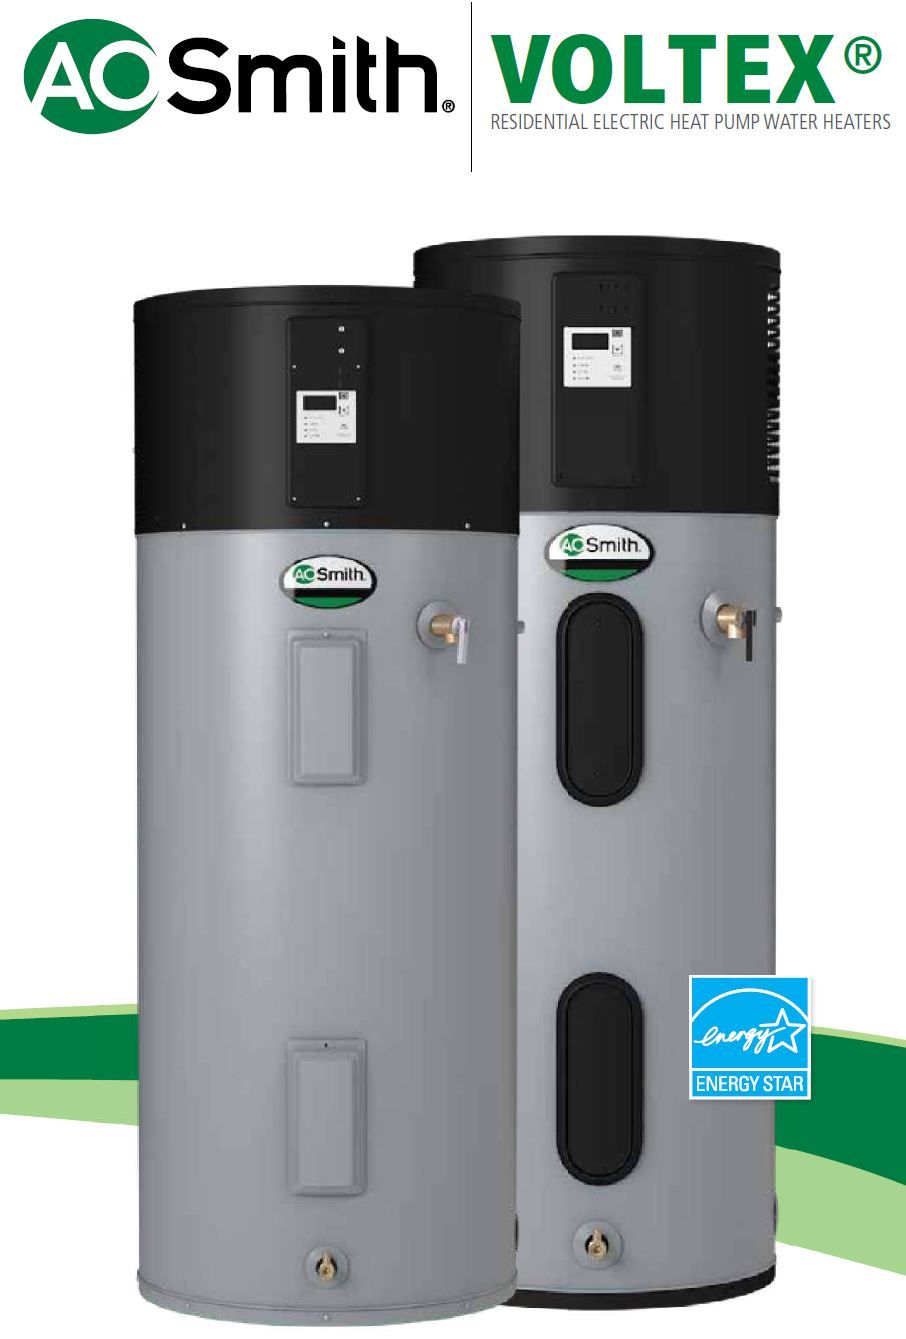 A.O. Smith Hybrid Electric Heat Pump Water Heaters